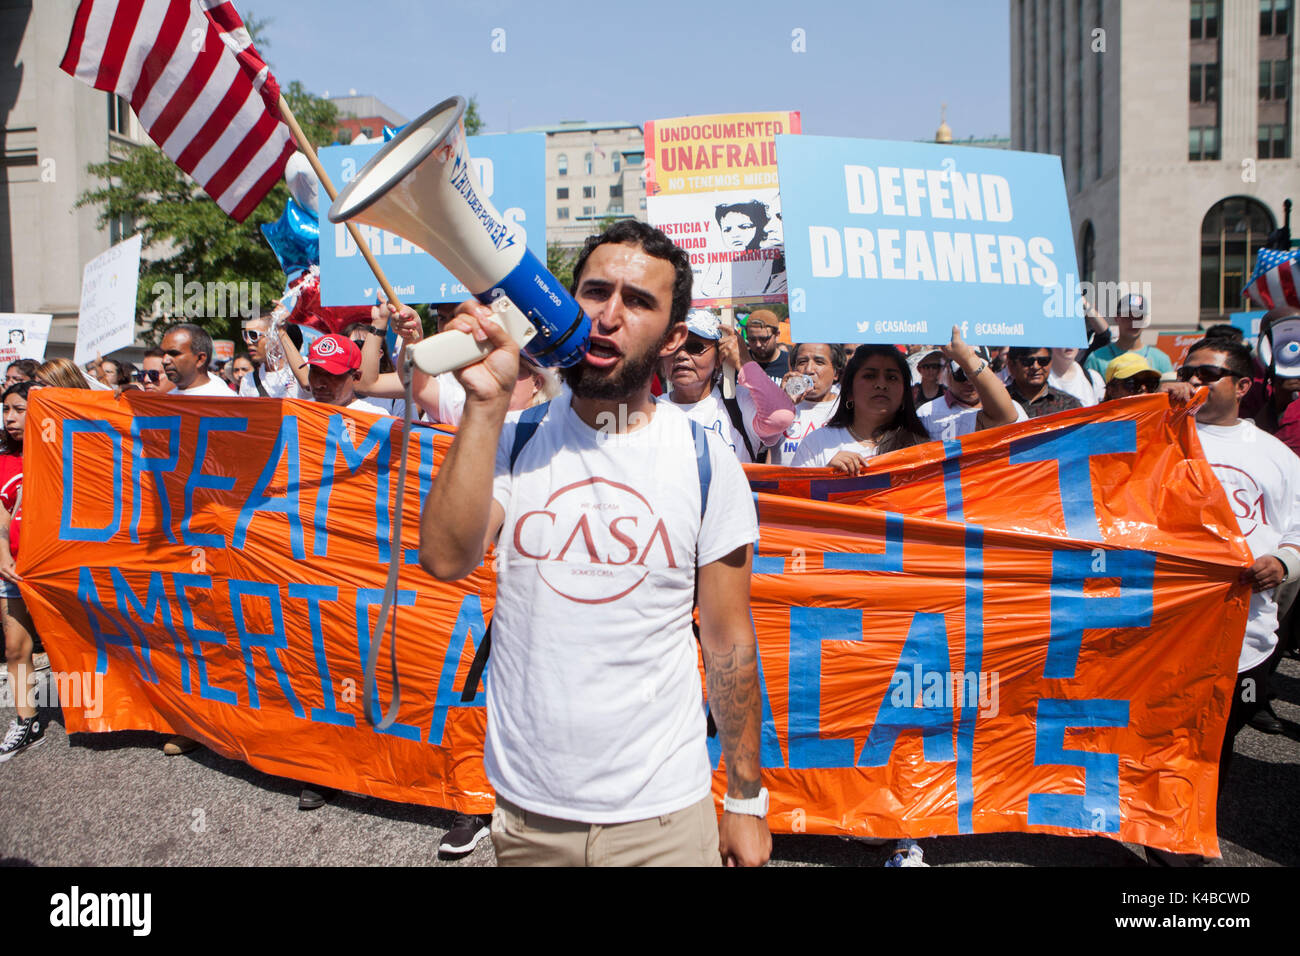 Washington, USA. 5th Sep, 2017. As President Donald Trump rescinds DACA (Deferred Action for Childhood Arrivals), a large crowd of DACA supporters gather at the White House to protest against the Trump administration's decision. Credit: B Christopher/Alamy Live News Stock Photo